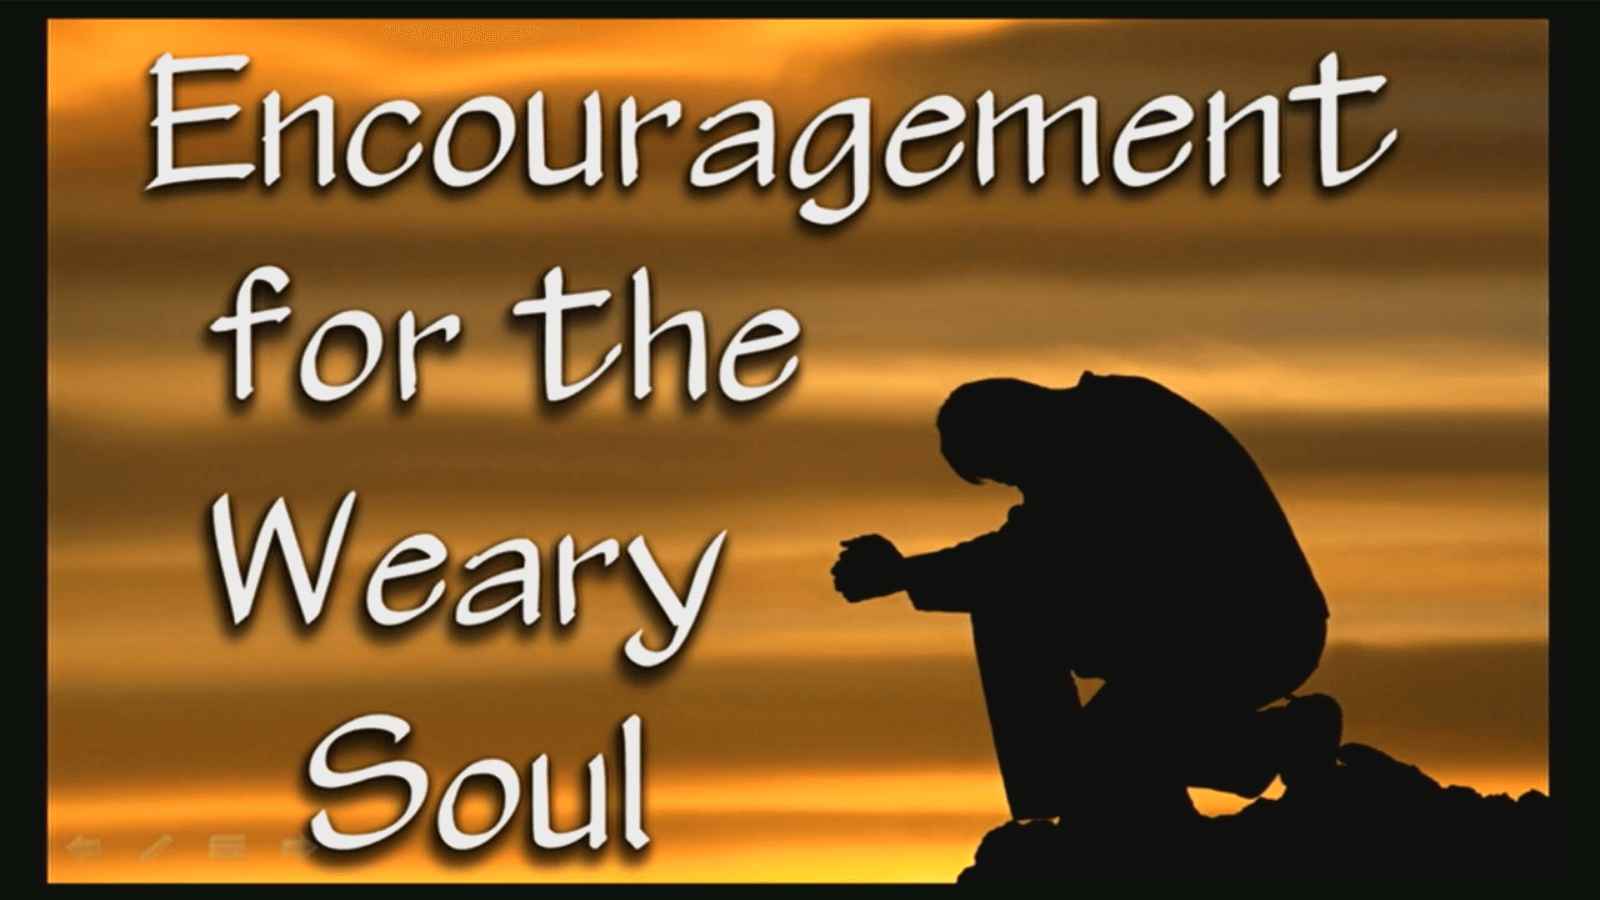 Encouragement for the Weary Soul